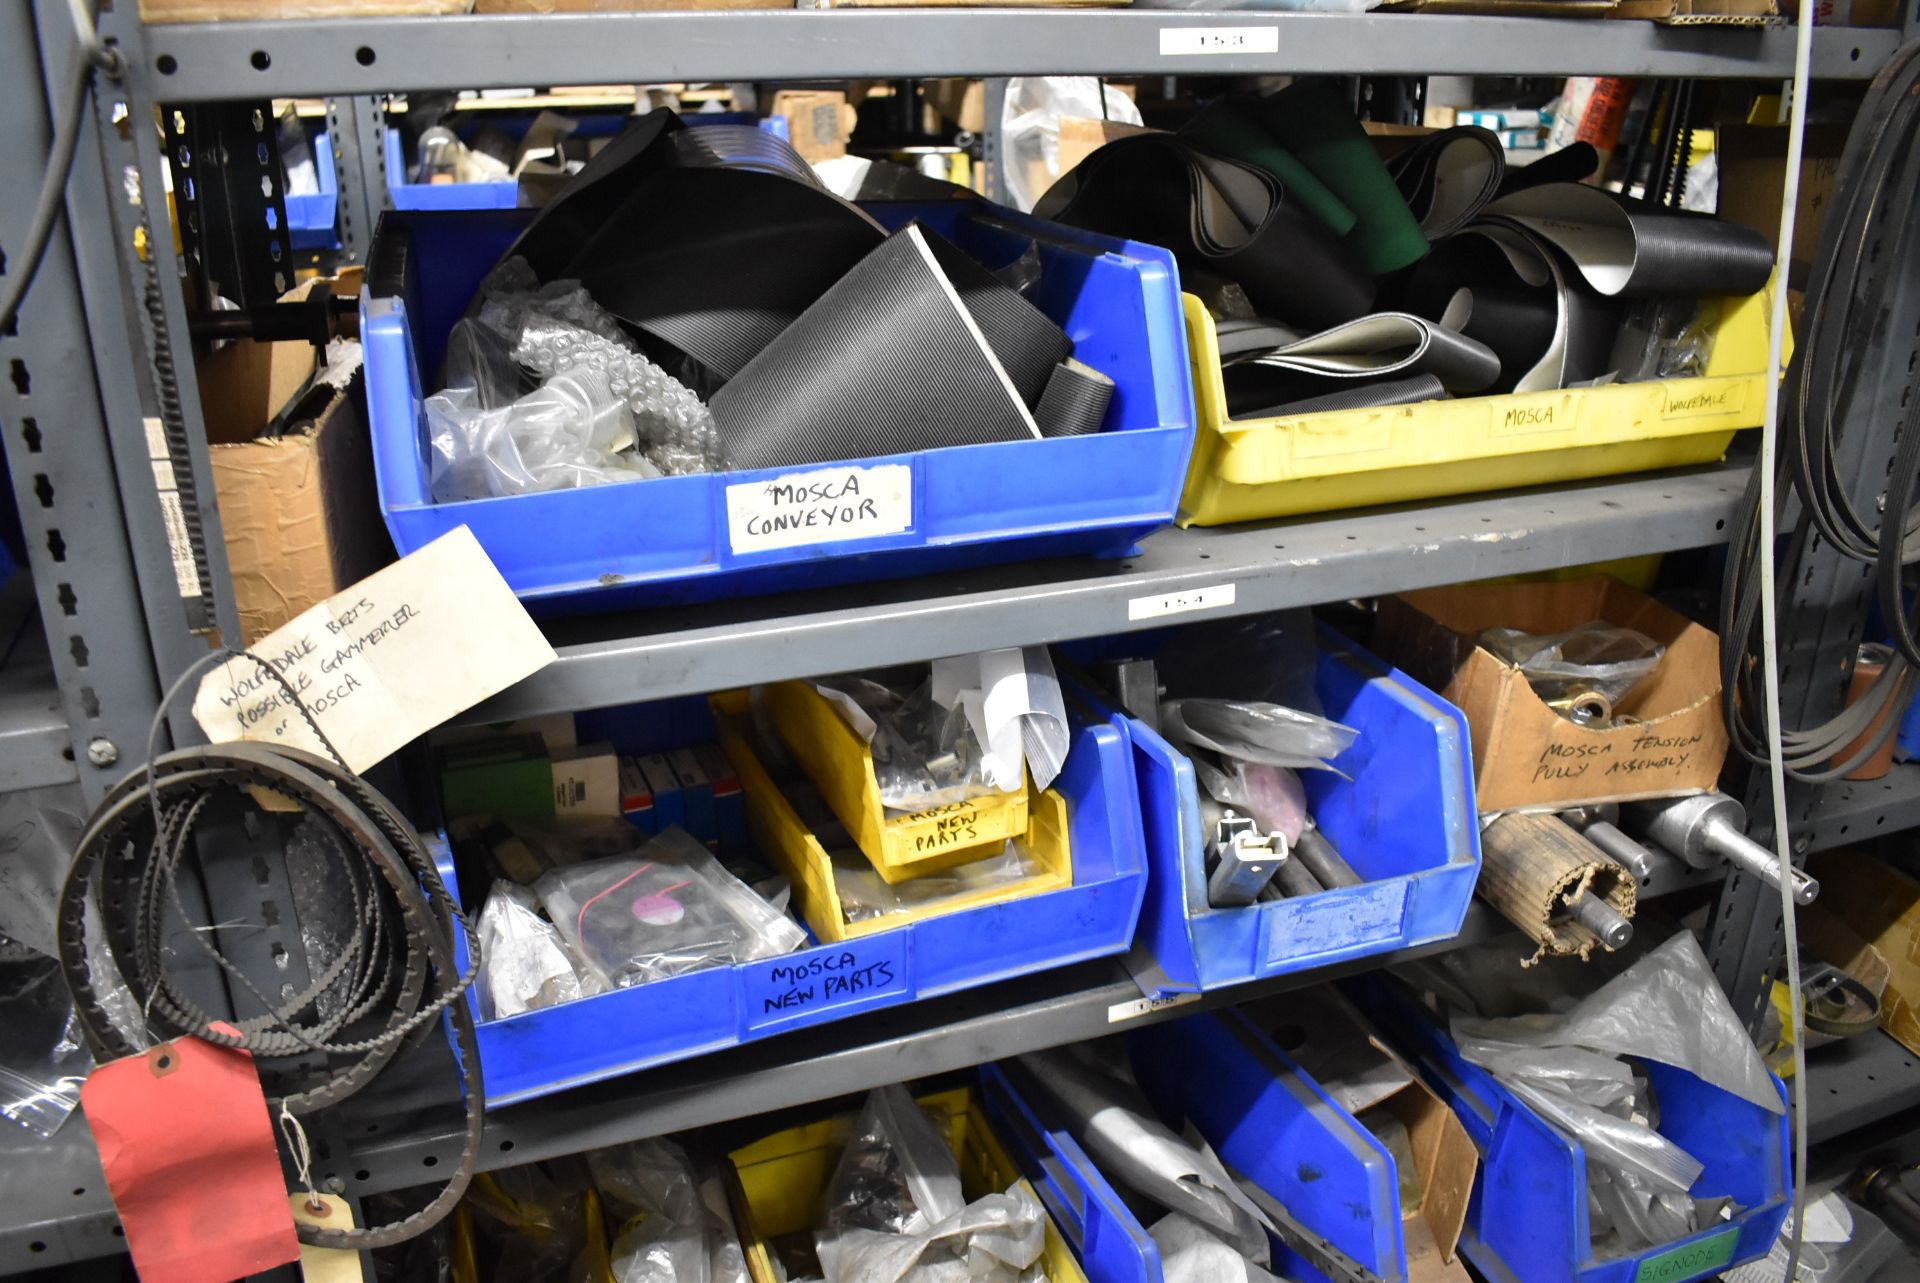 LOT/ (5) SECTIONS OF STEEL SHELVING WITH CONTENTS - INCLUDING BEARINGS, DRIVE BELTS, GAUGES, - Image 15 of 26